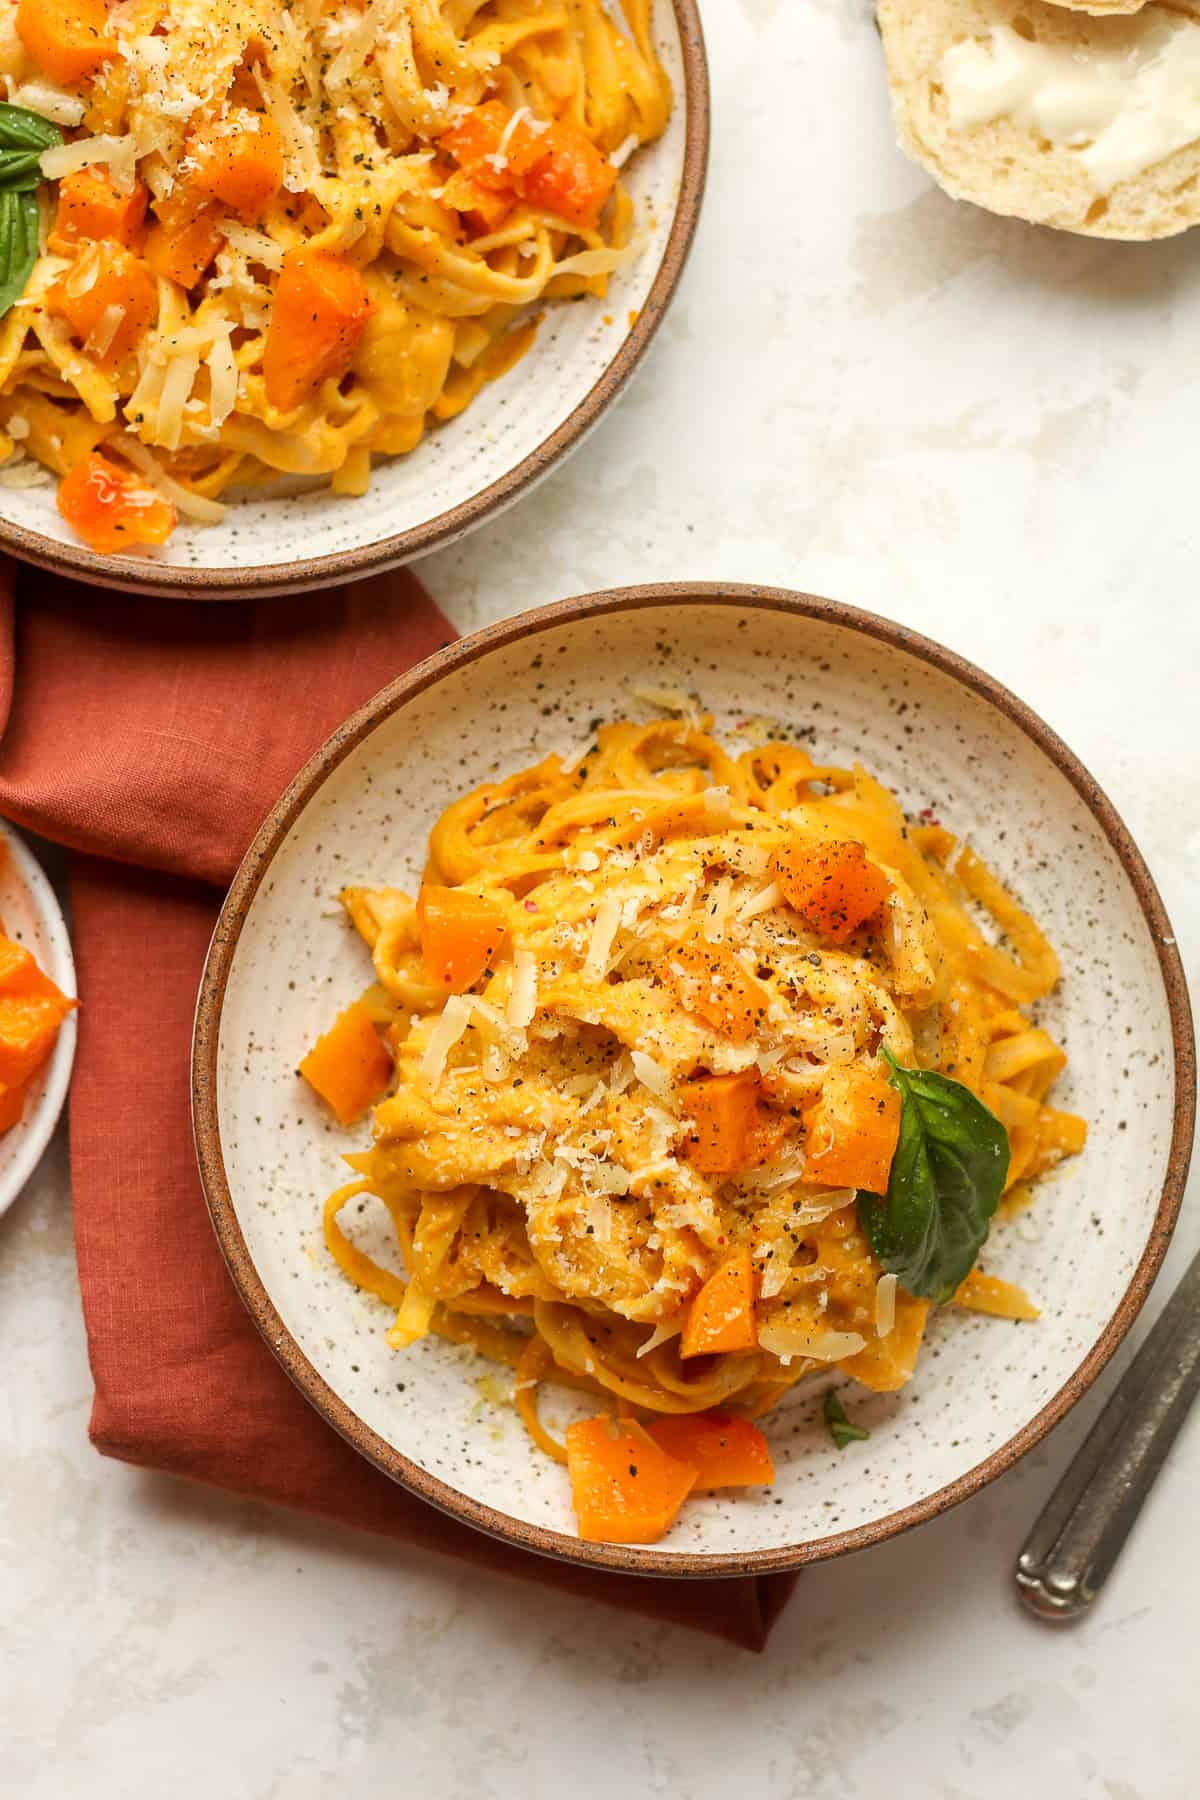 Two bowls of roasted butternut squash pasta with a dark orange napkin.